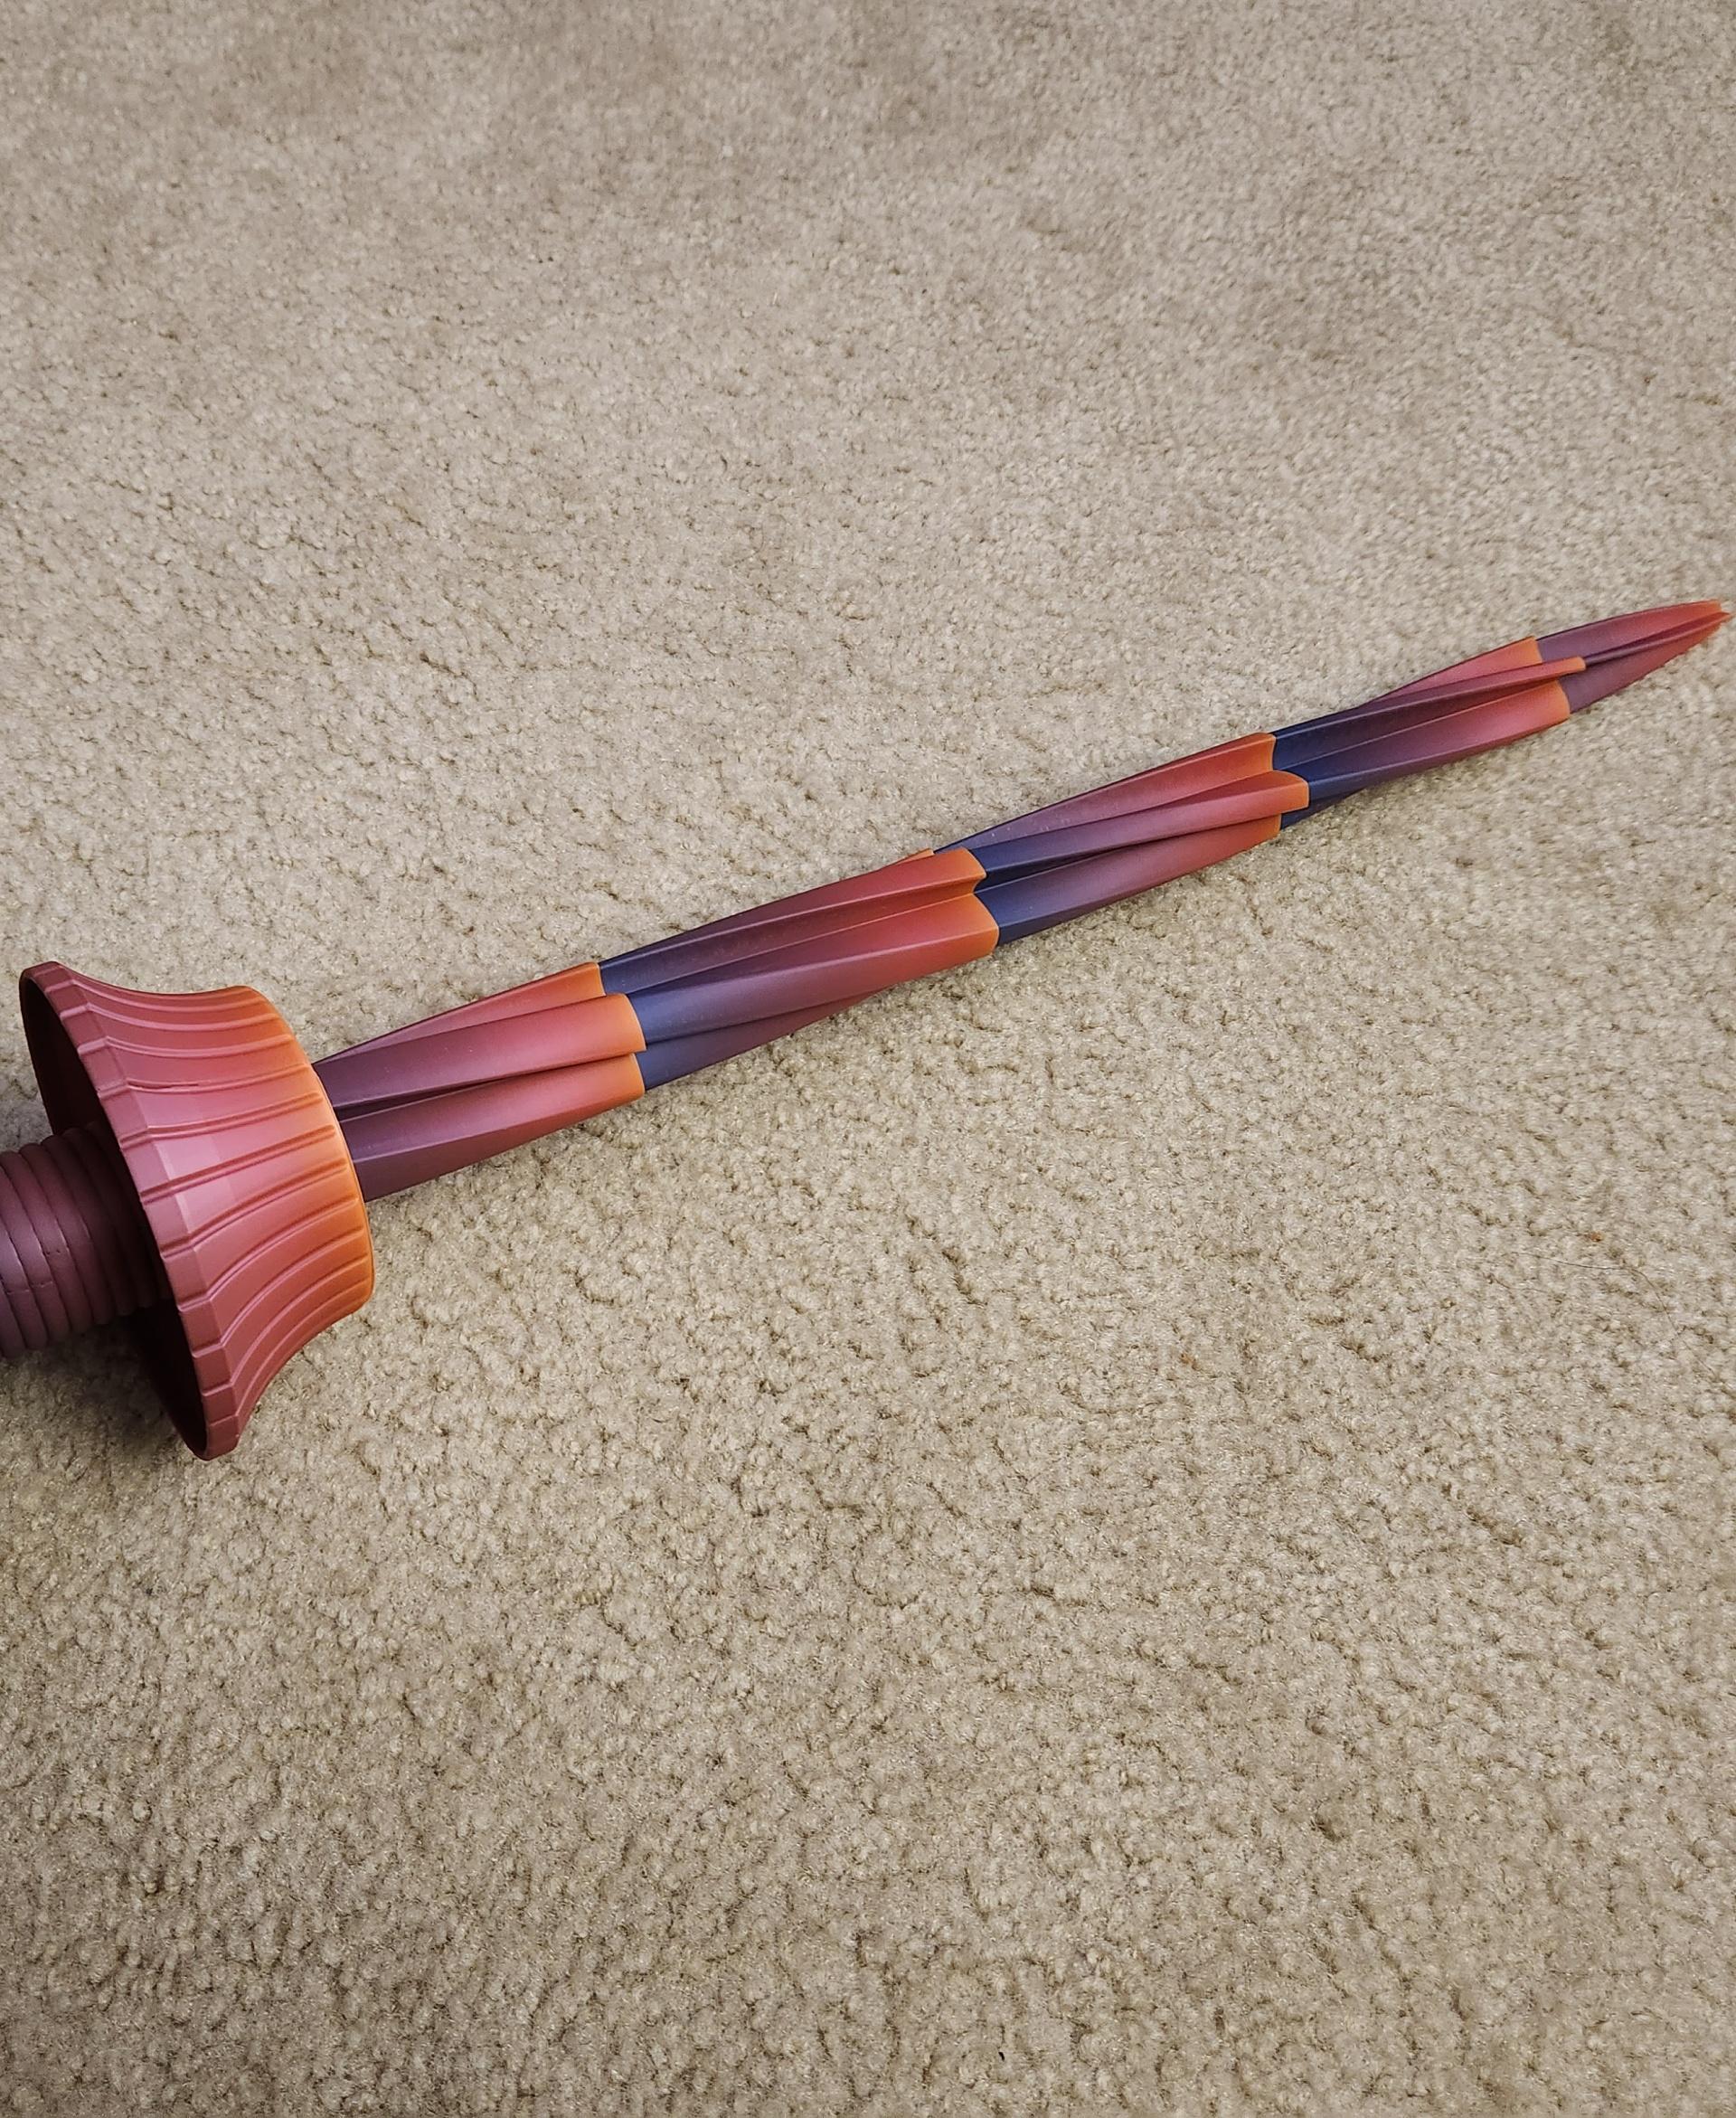 Collapsing Drill Sword Print-in-Place - Creality rainbow filament on Bambu Lab X1C - blade extended - 3d model